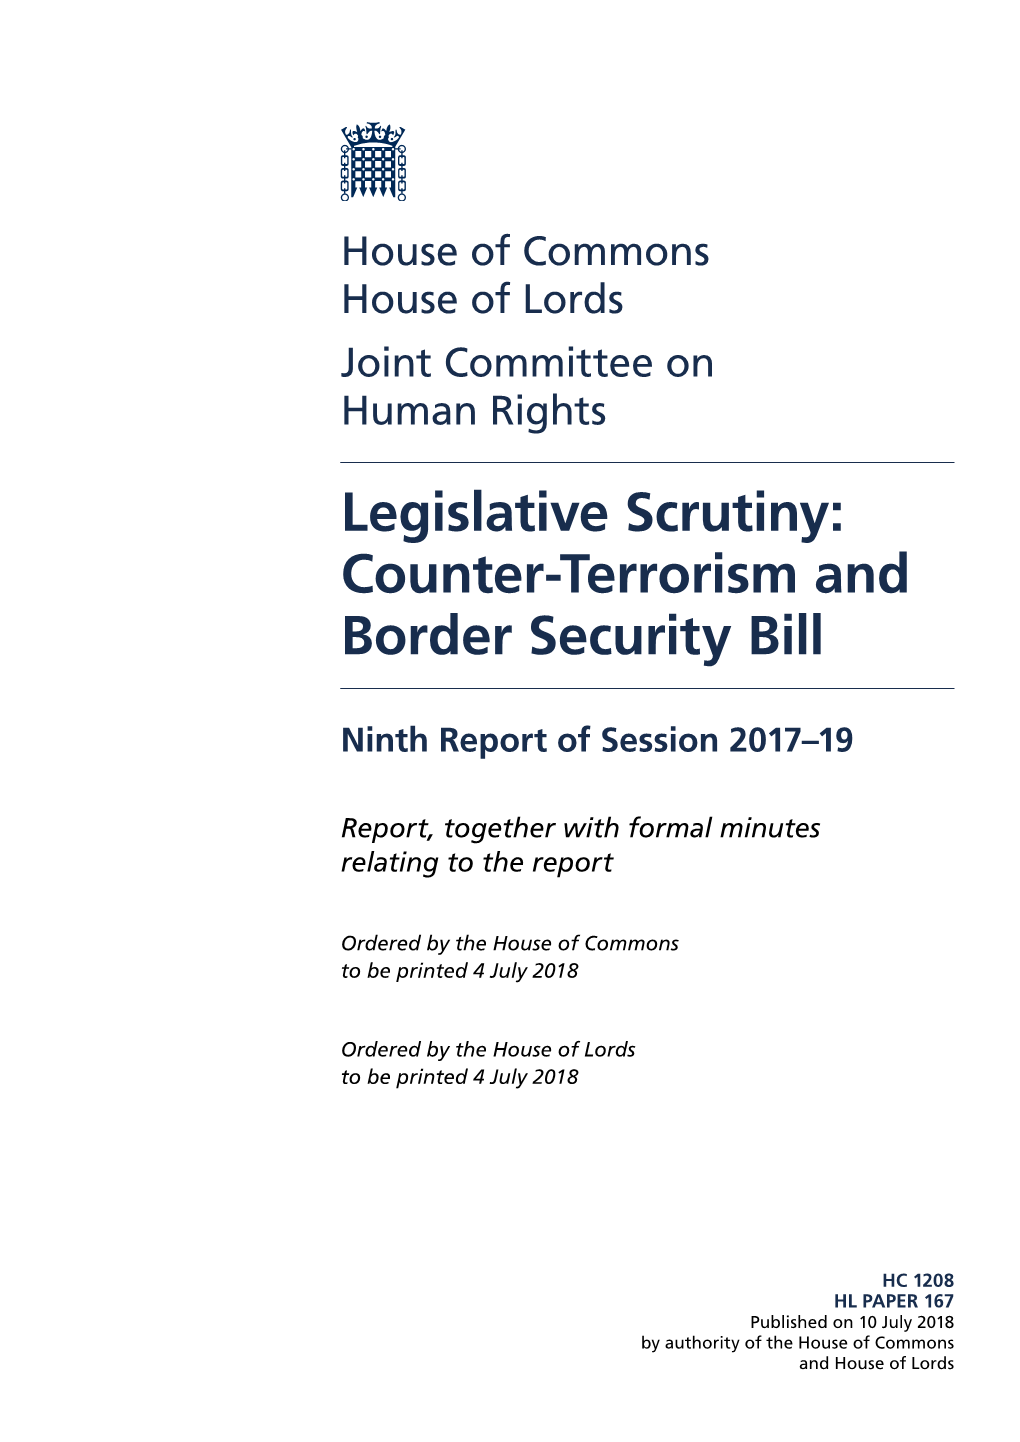 Counter-Terrorism and Border Security Bill